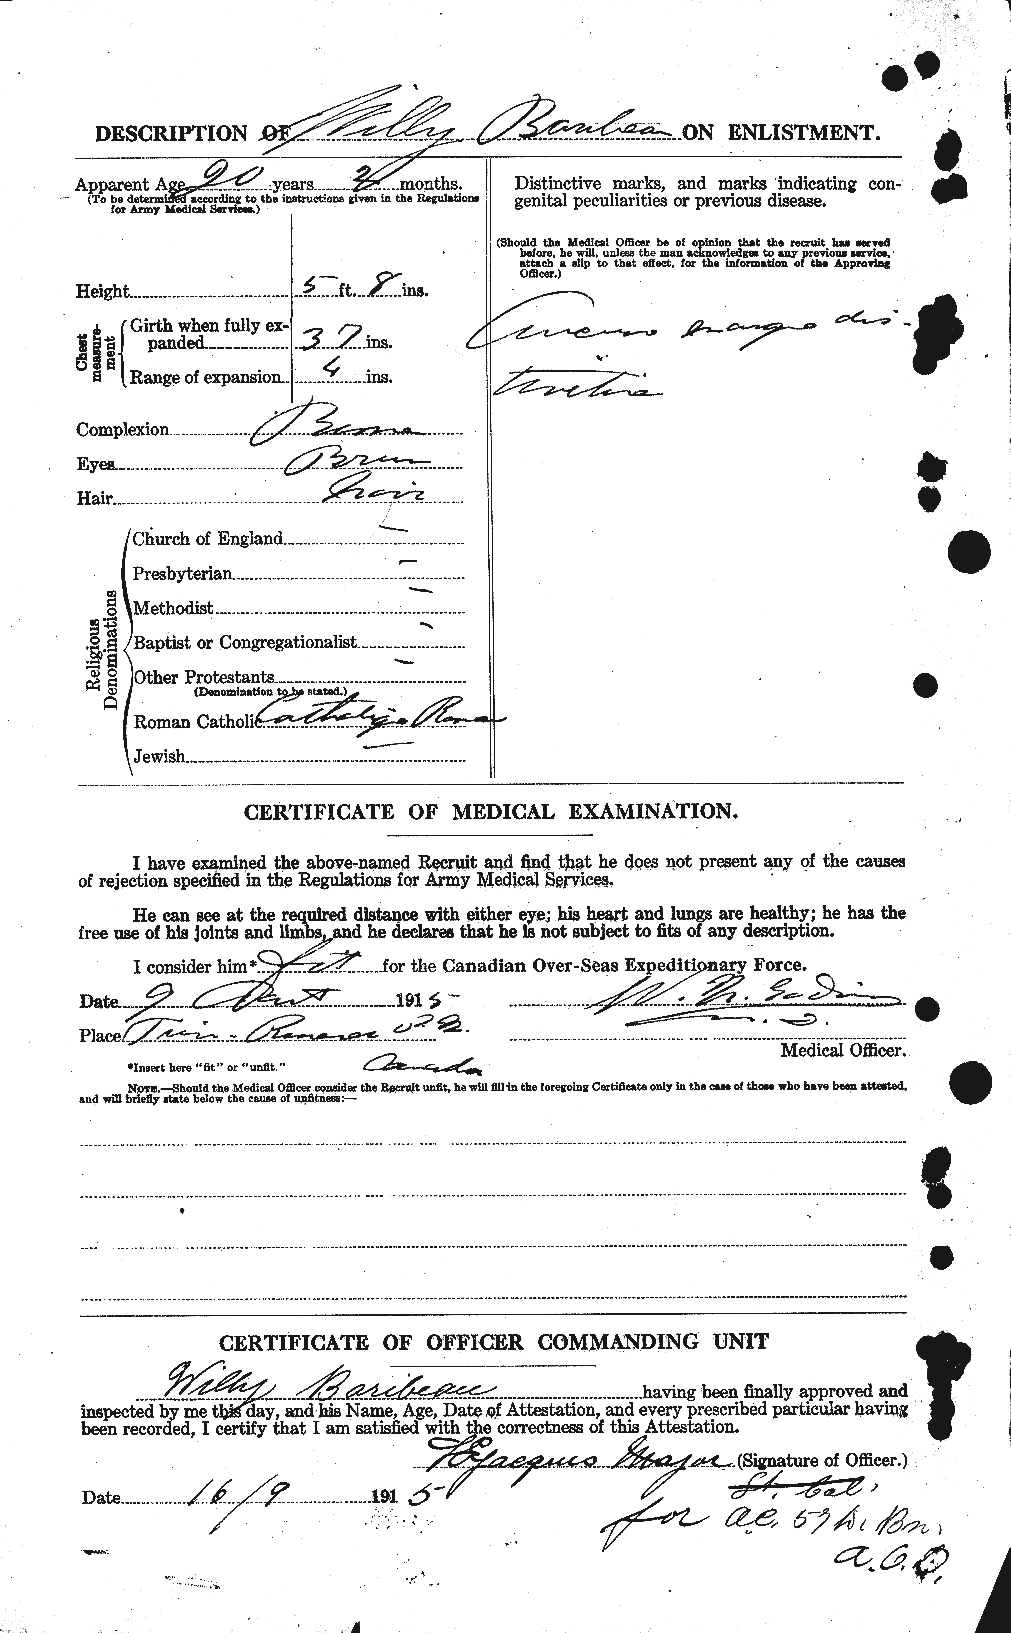 Personnel Records of the First World War - CEF 220627b